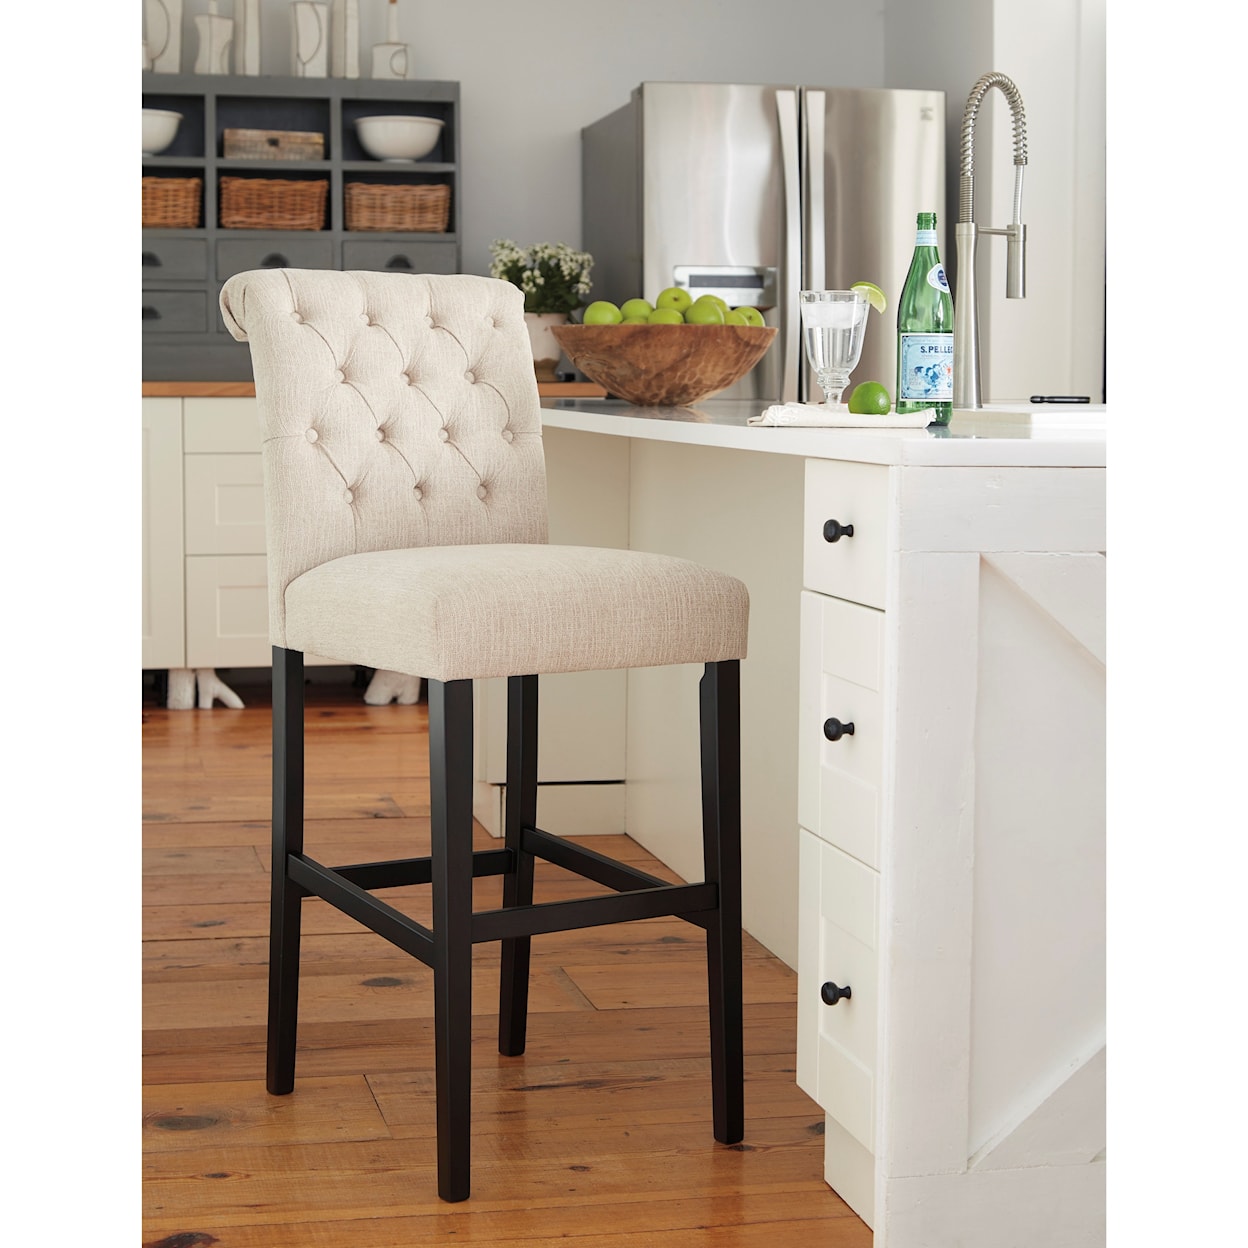 Signature Design by Ashley Tripton Tall Upholstered Barstool